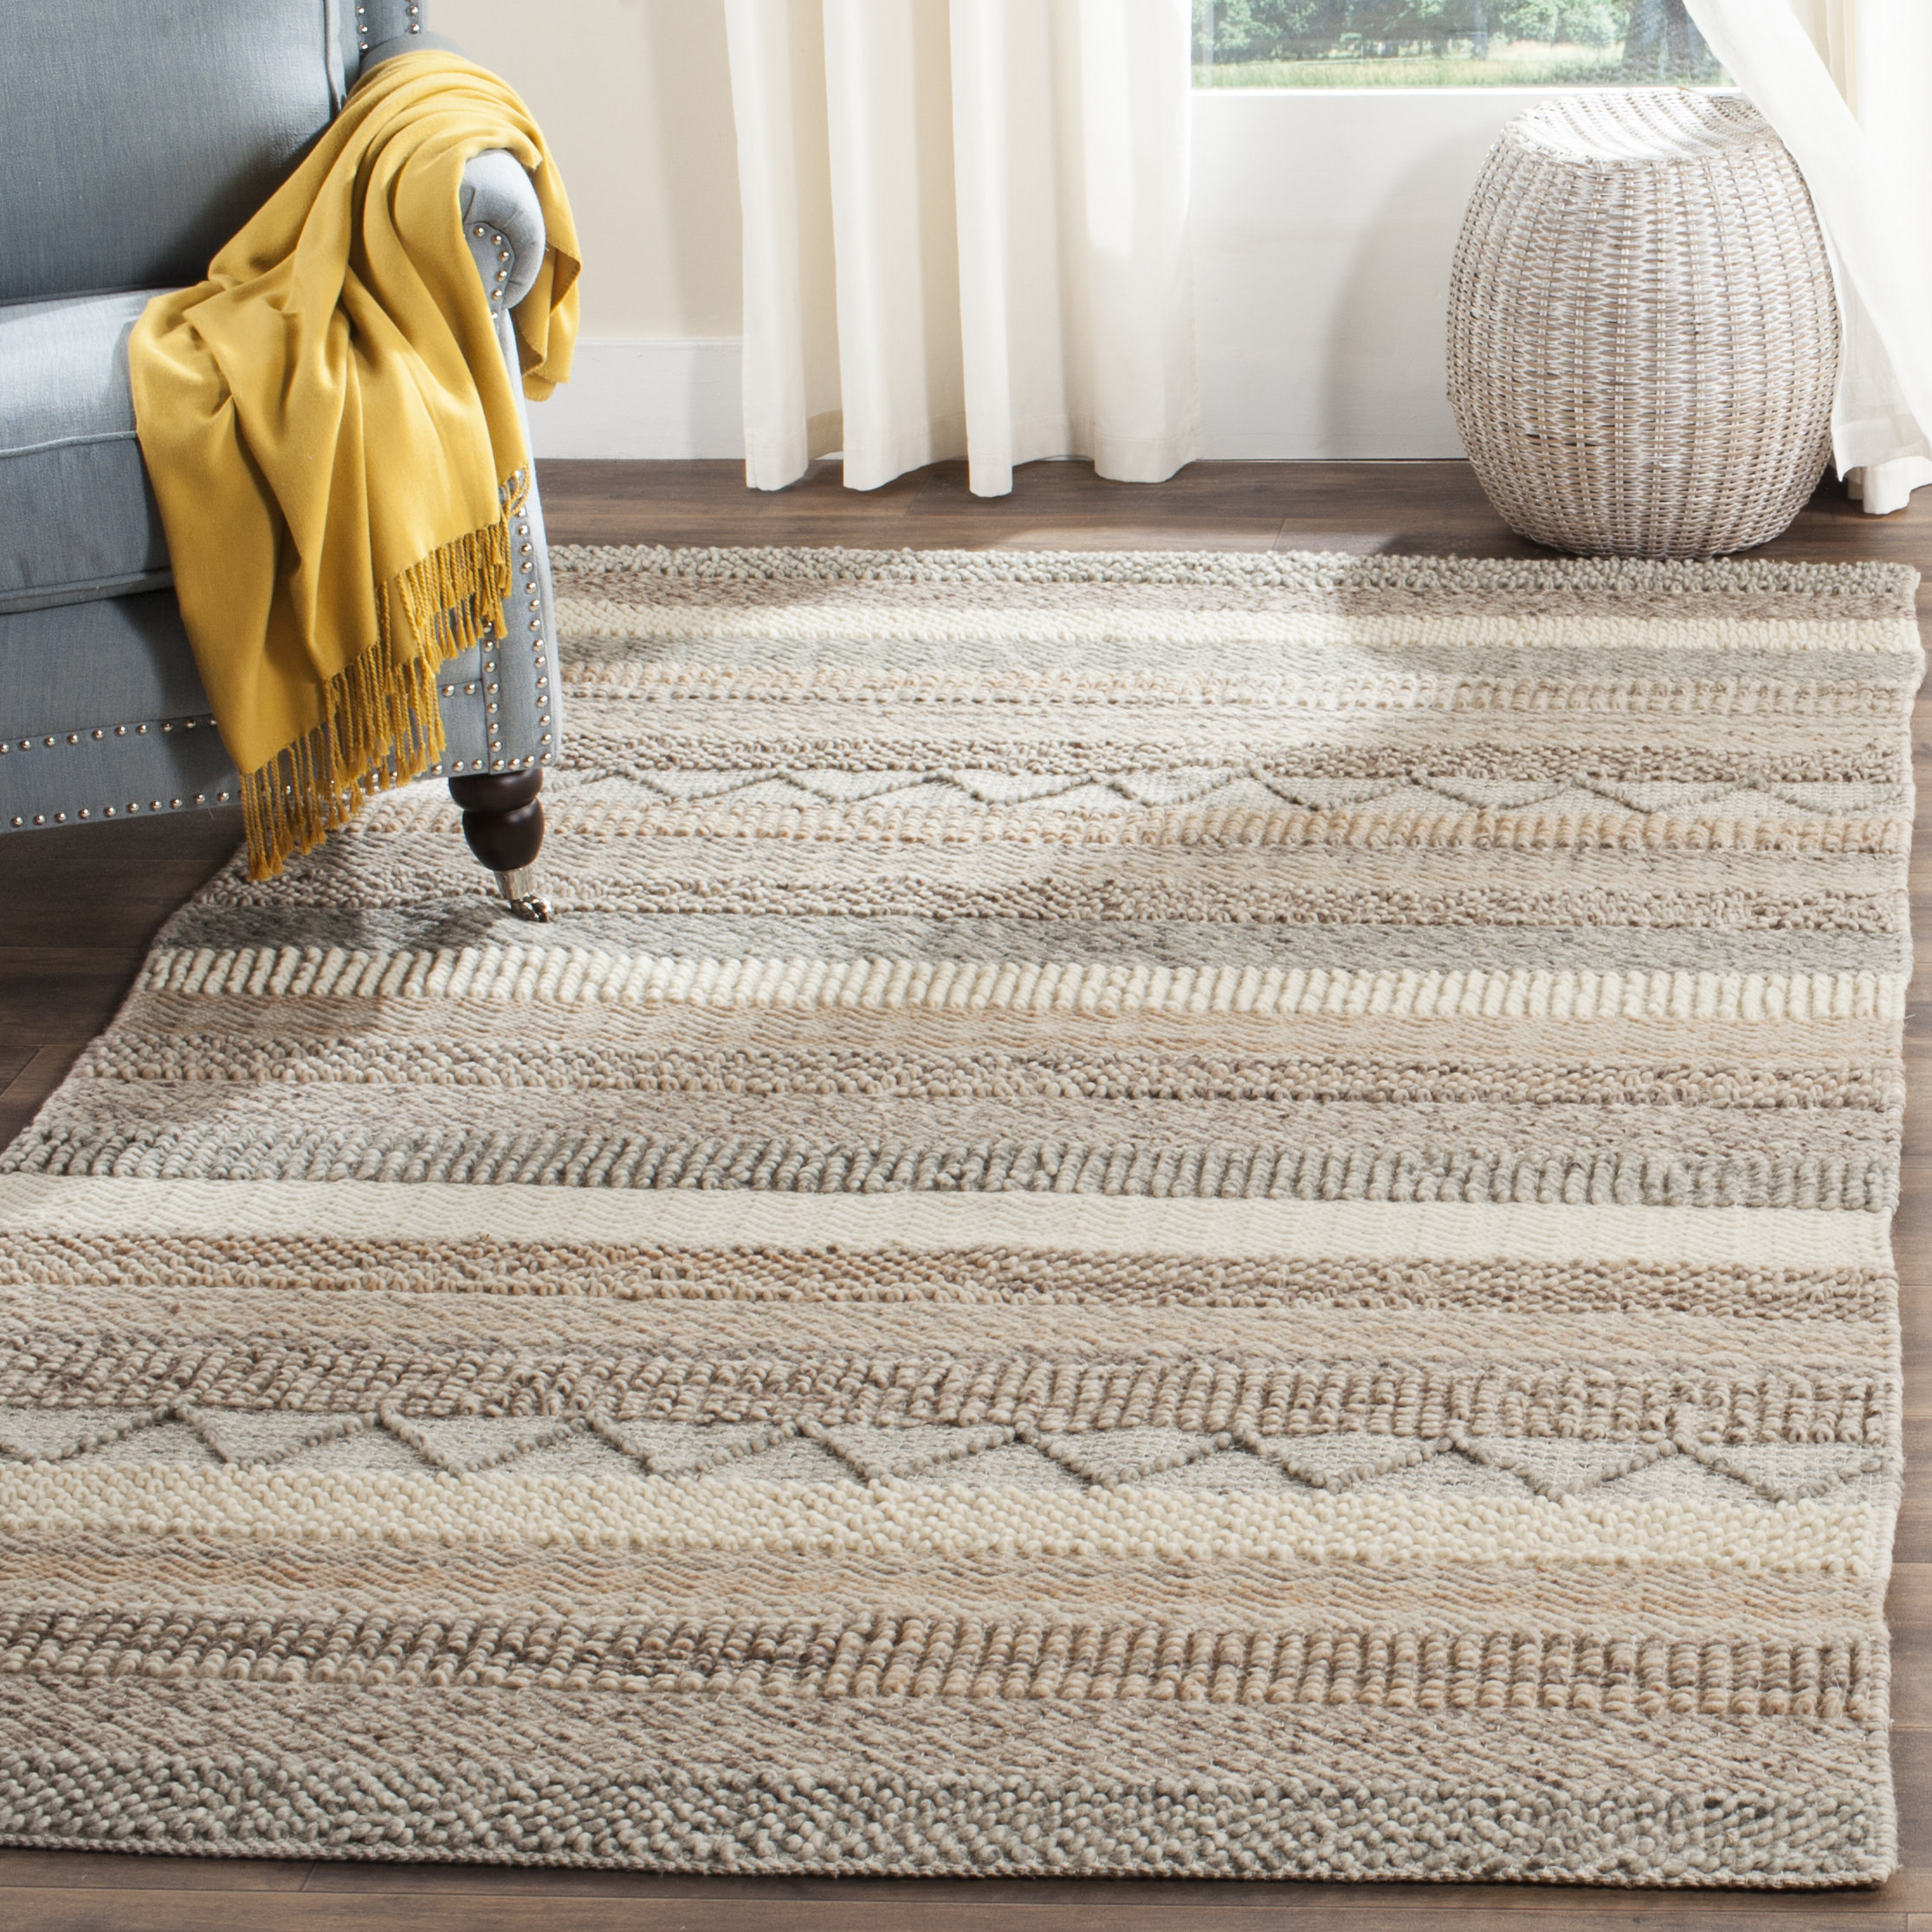 Rug Pale Natural Beige Off White Pin Stripe Soft Cotton Jute Yarn Indian Flat Weave Mat Hand Loomed Ethically Sourced 